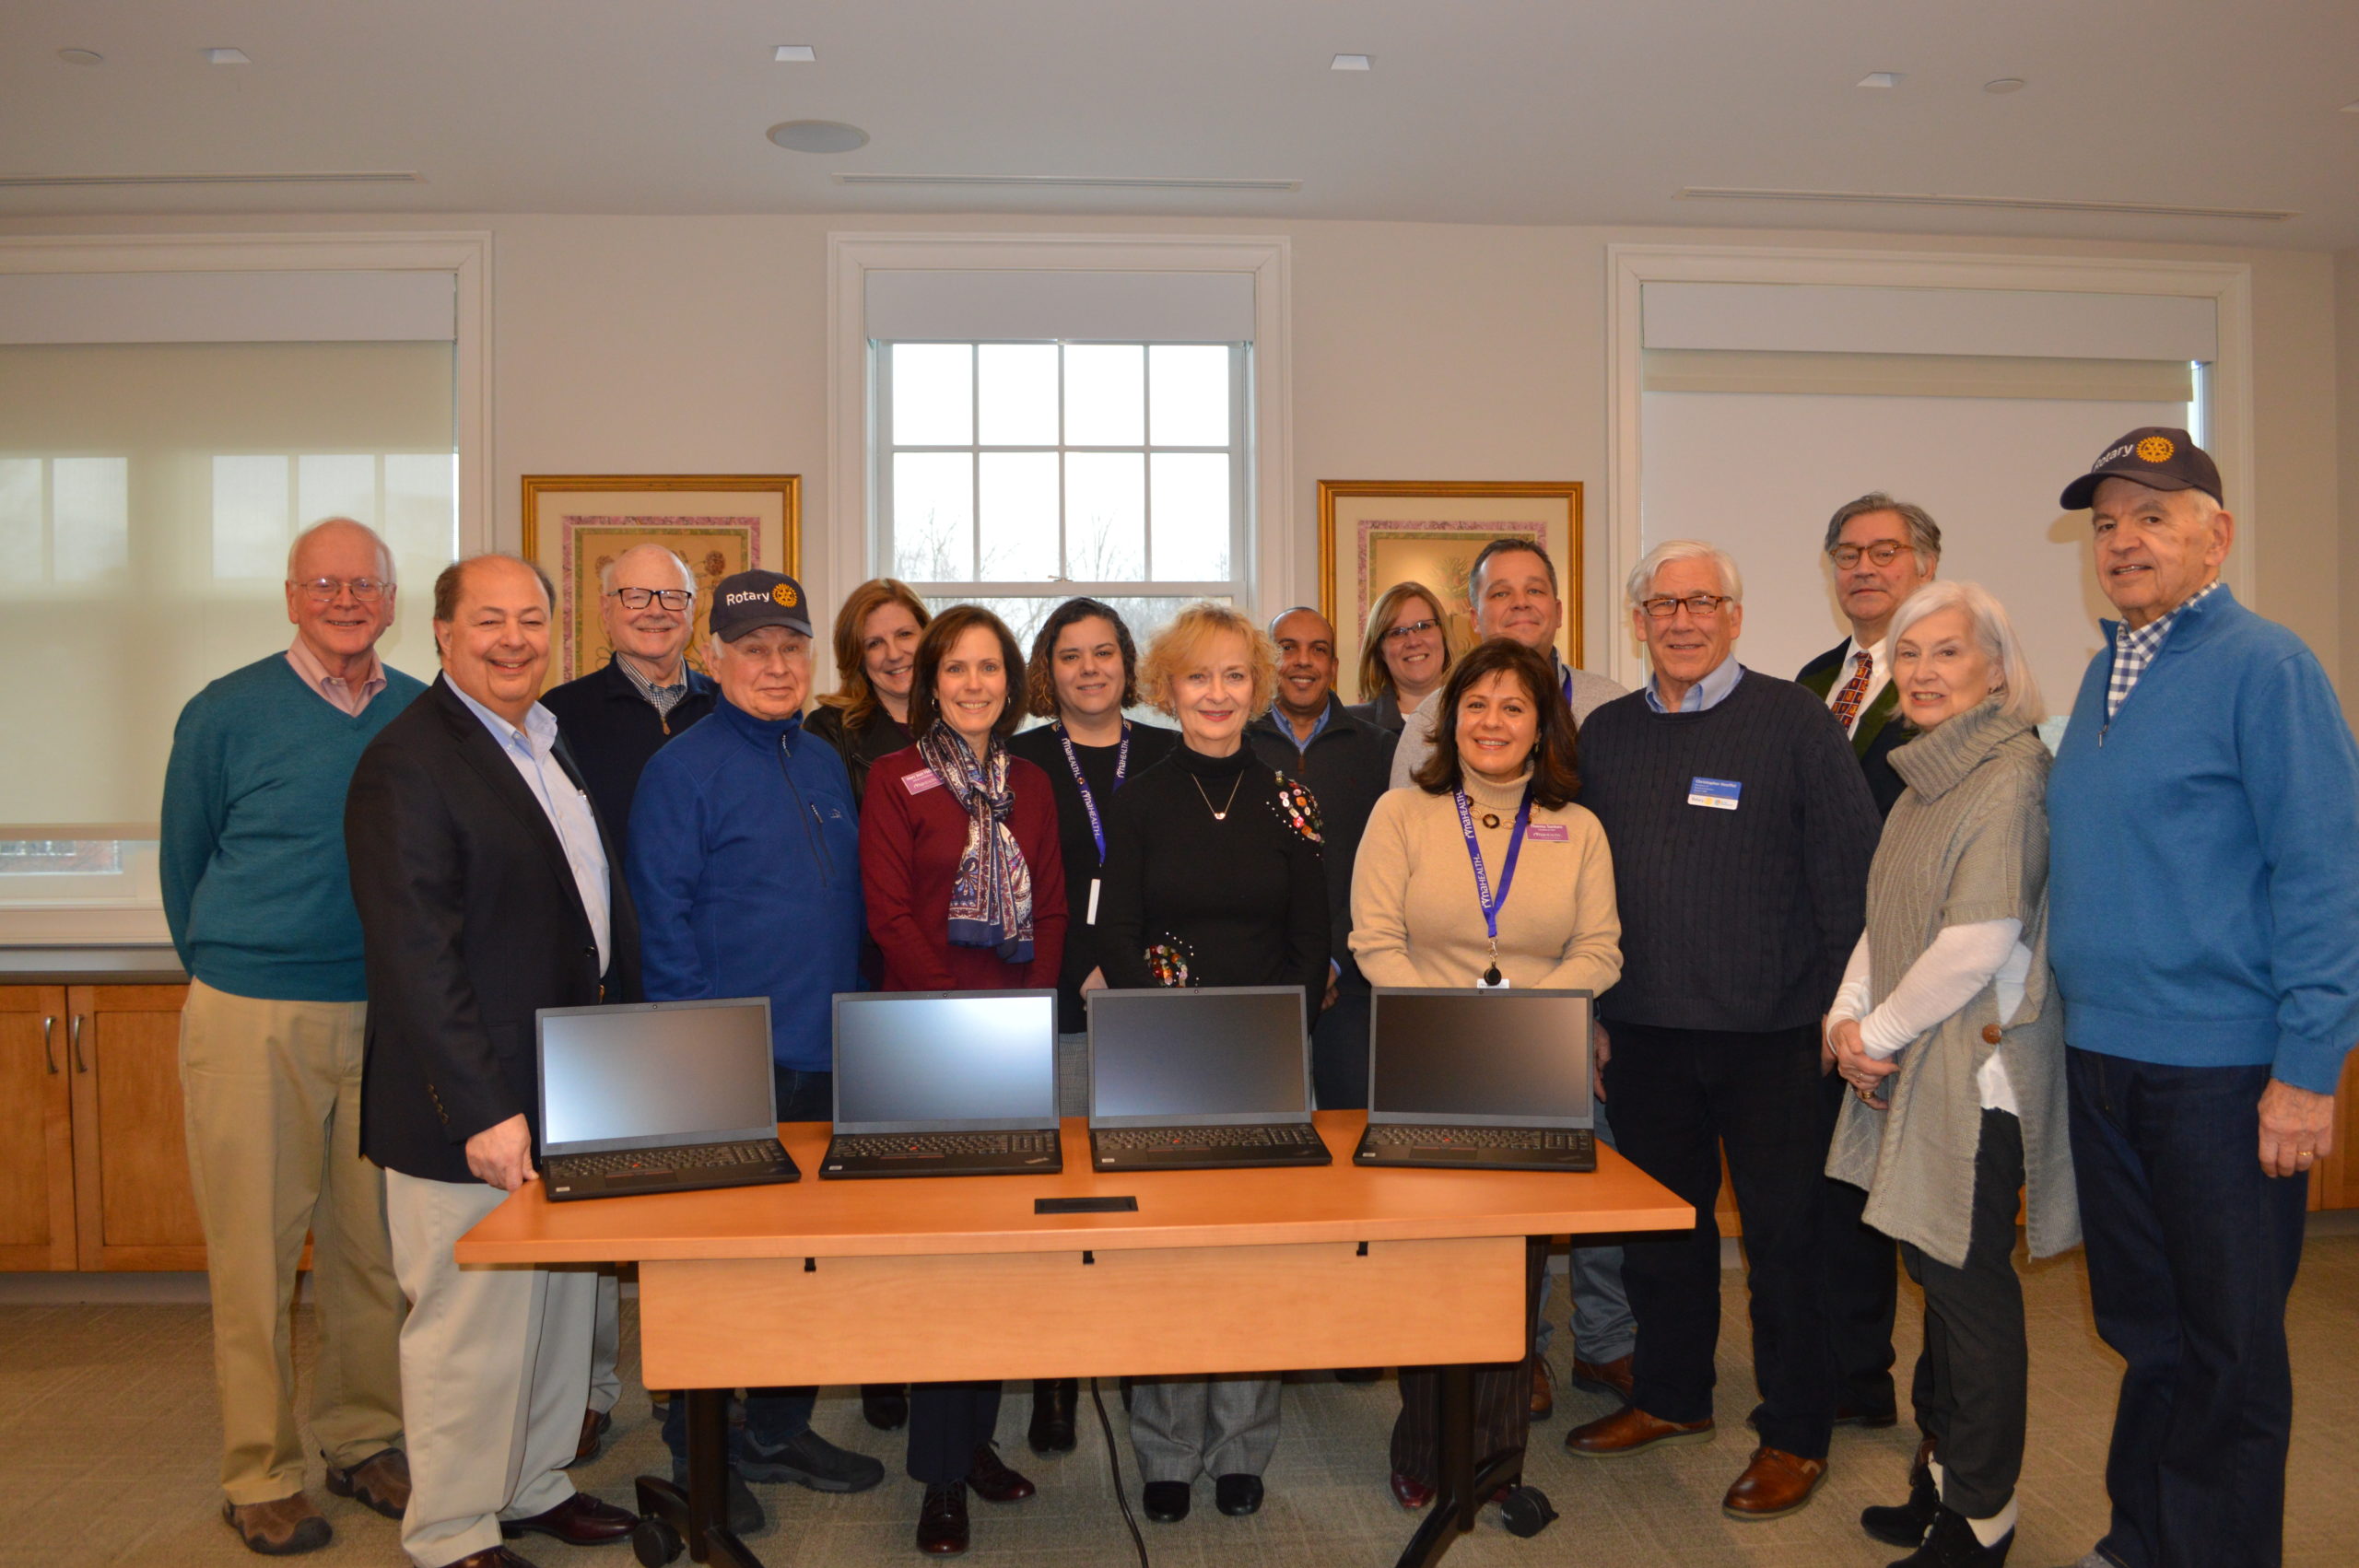 Pictured here are several area Rotarians with members of the RVNAhealth leadership team and the newly purchased laptops